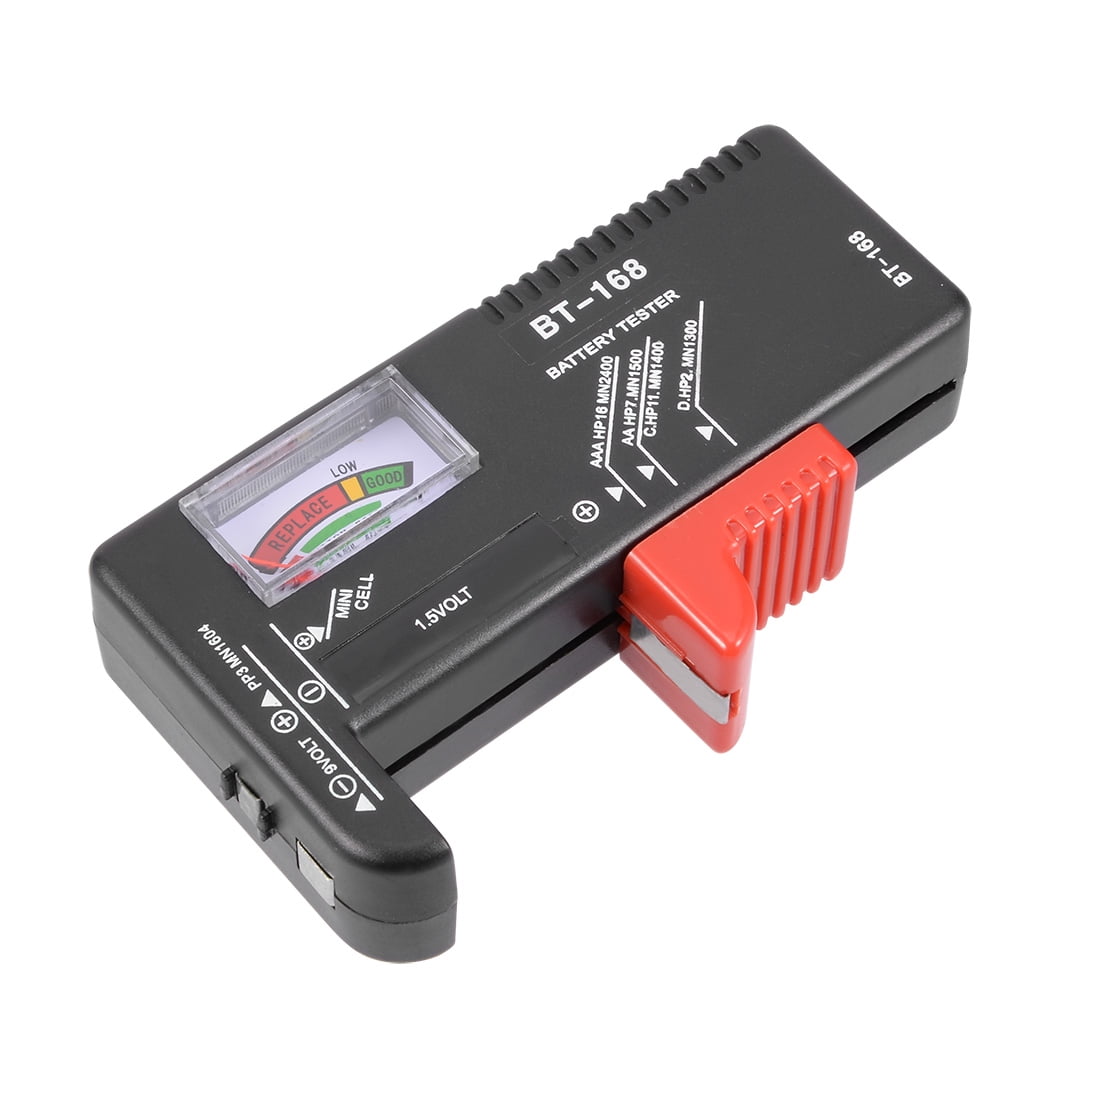 Details about   Battery Volt Tester Checker Universal Button Cell Battery Tester AA/AAA/C/D/9V 